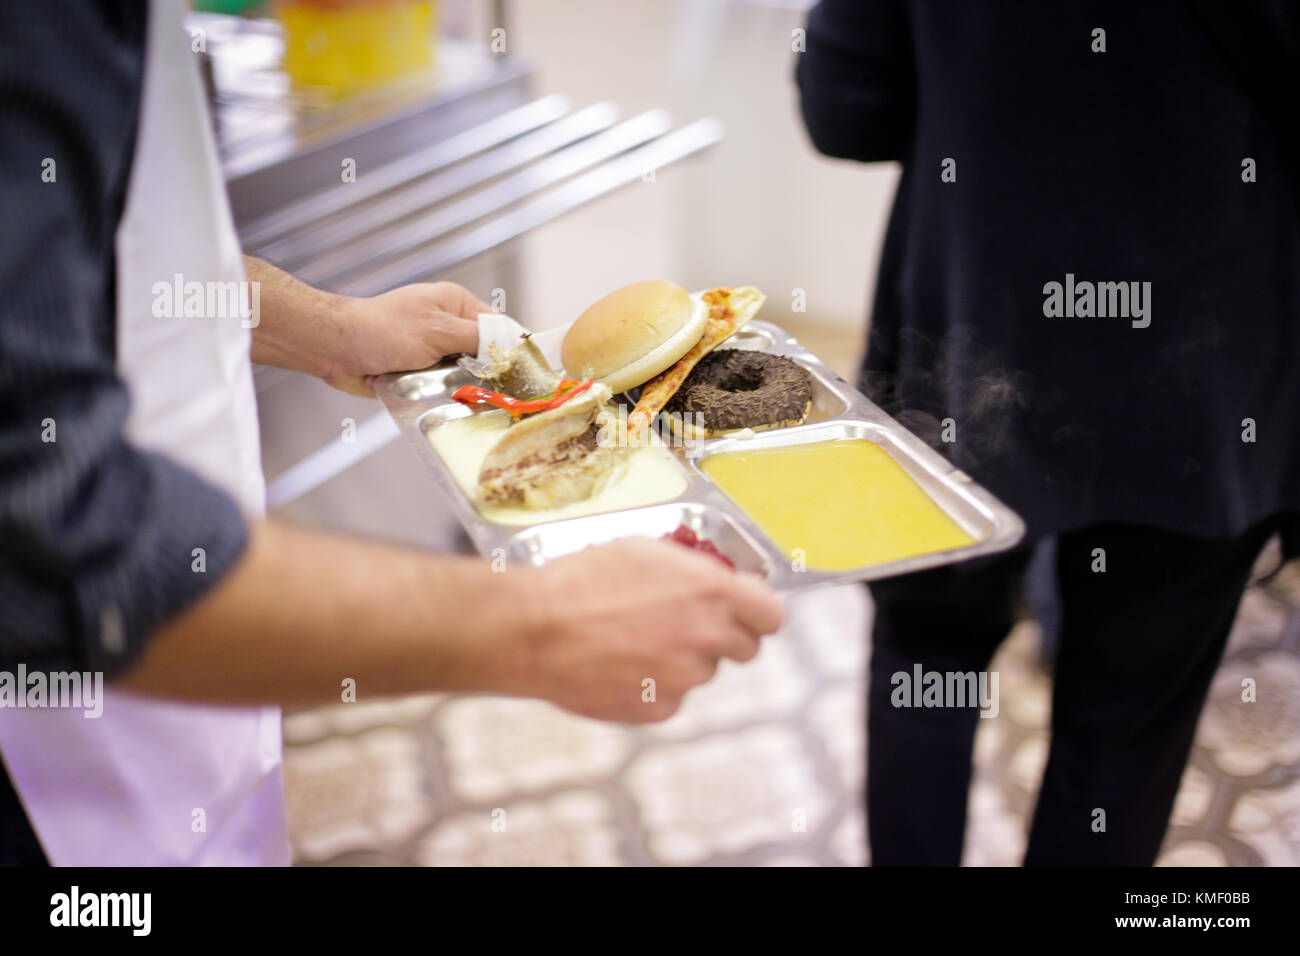 A person is having lunch at a cafeteria for poor people Stock Photo